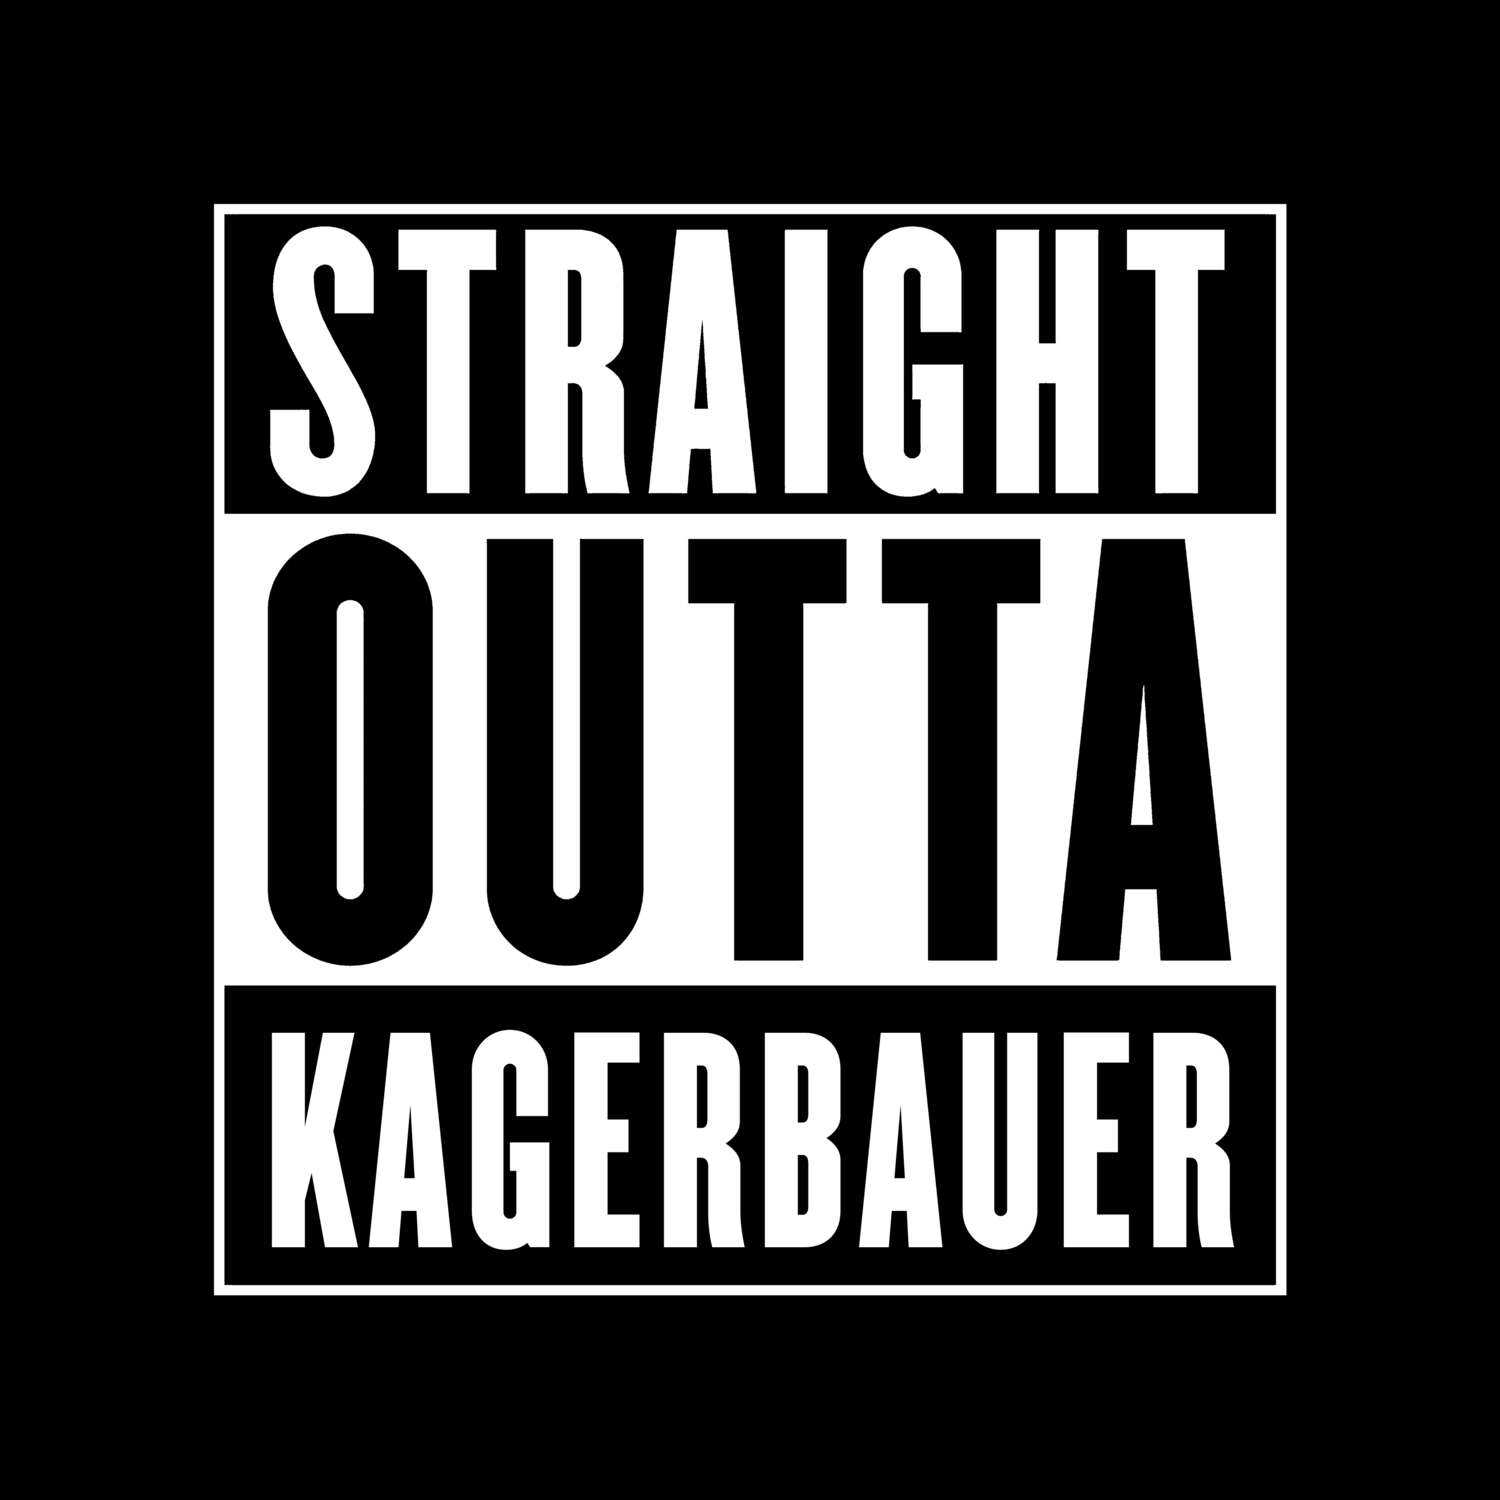 Kagerbauer T-Shirt »Straight Outta«